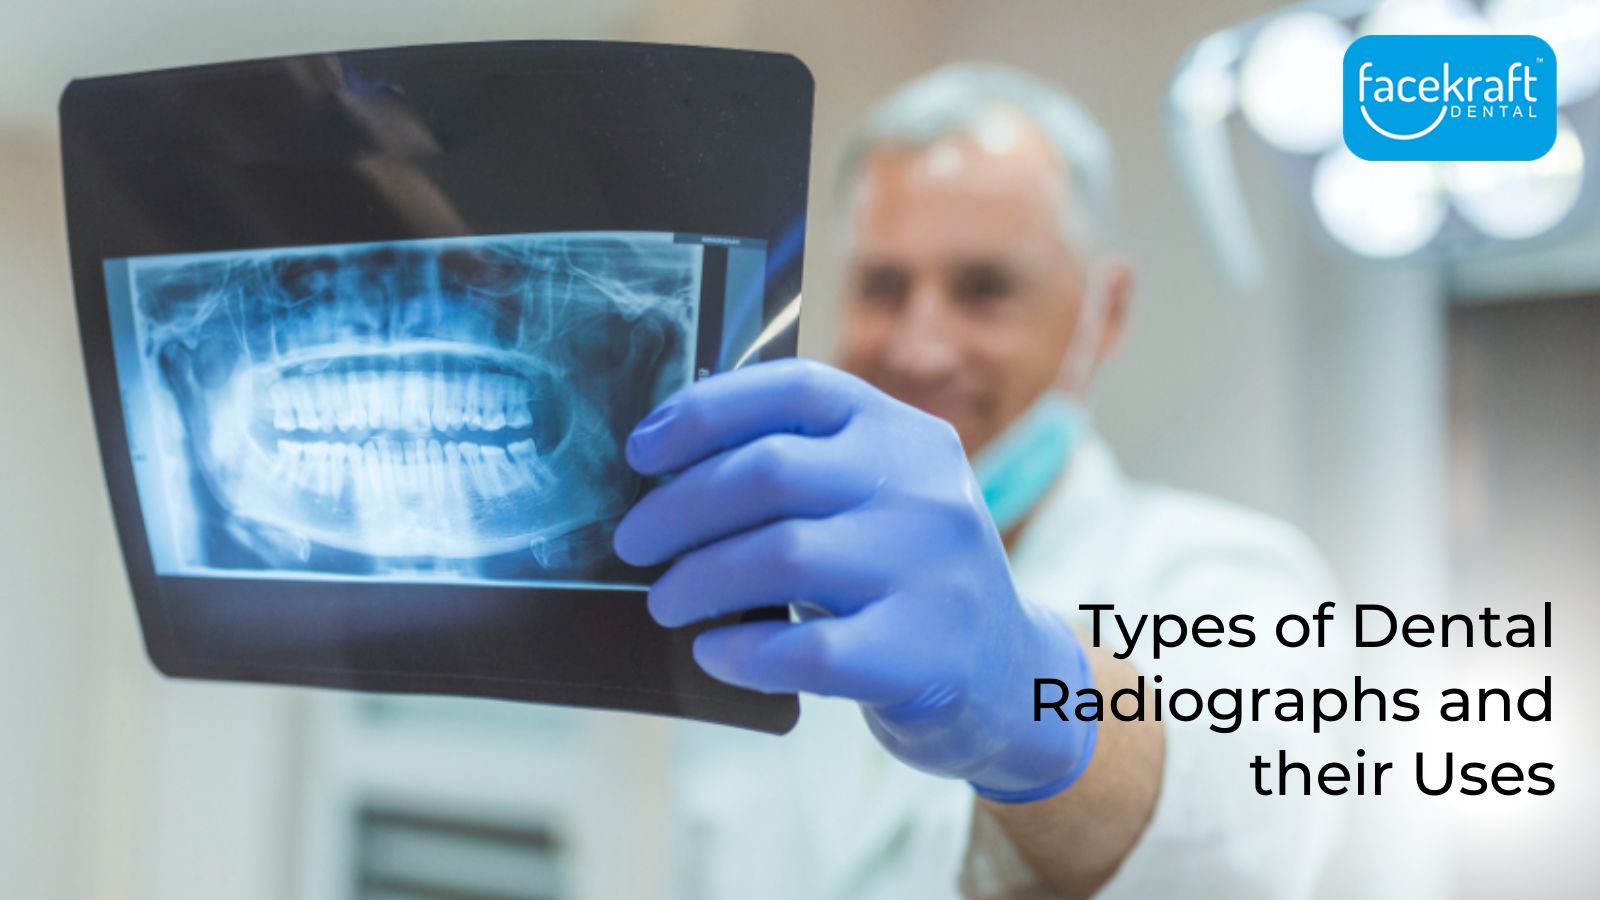 Types of Dental Radiographs and their Uses